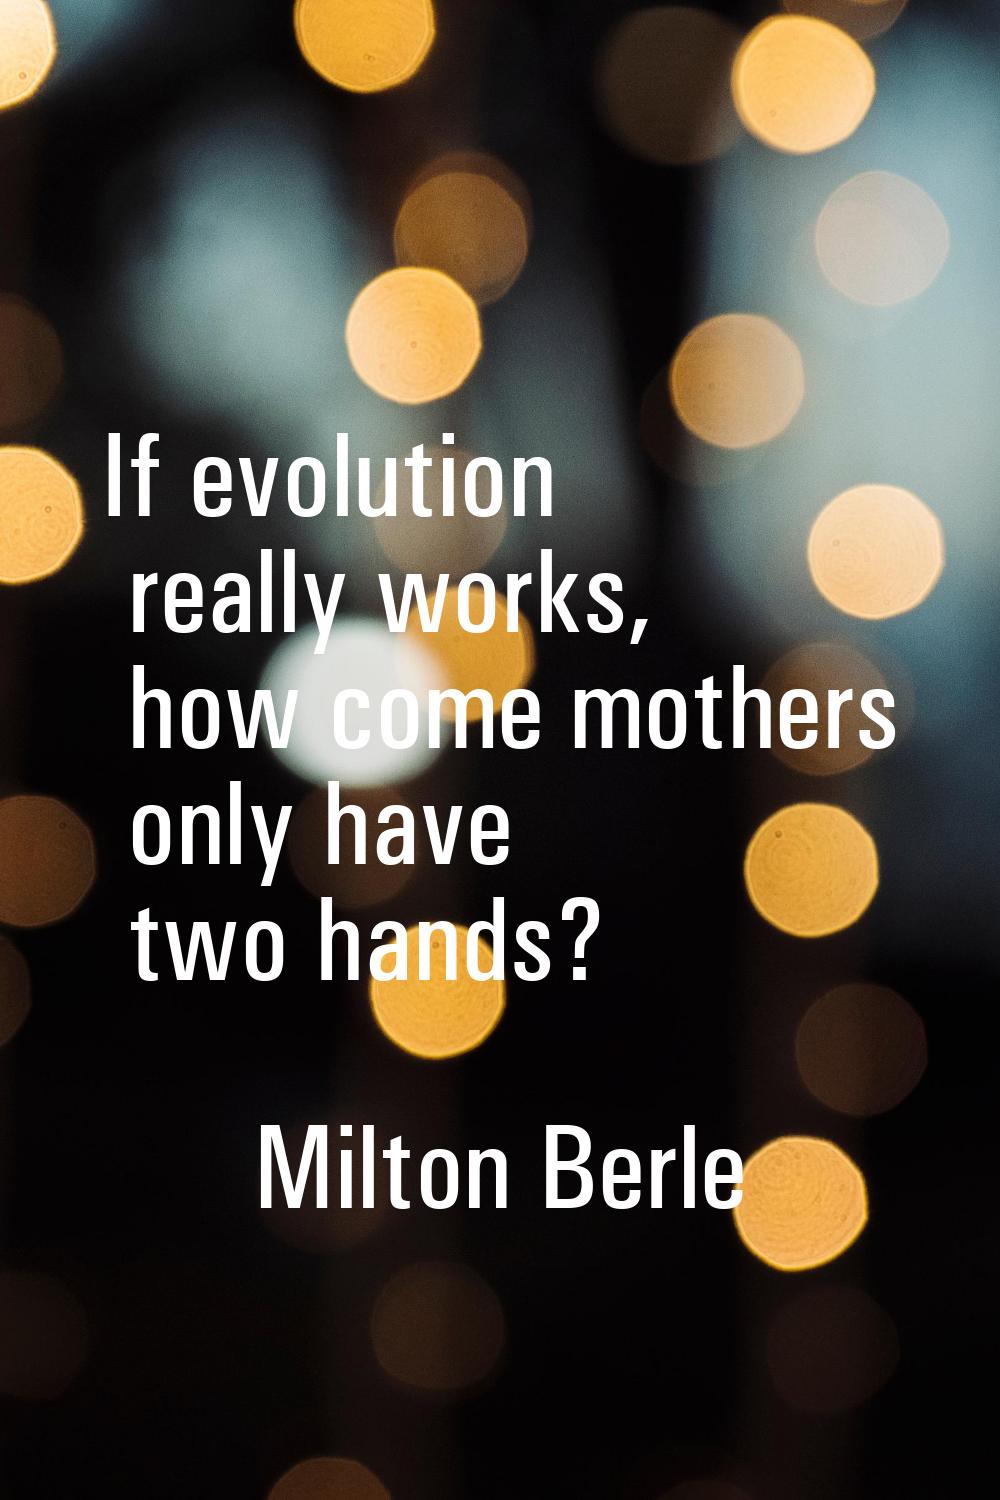 If evolution really works, how come mothers only have two hands?